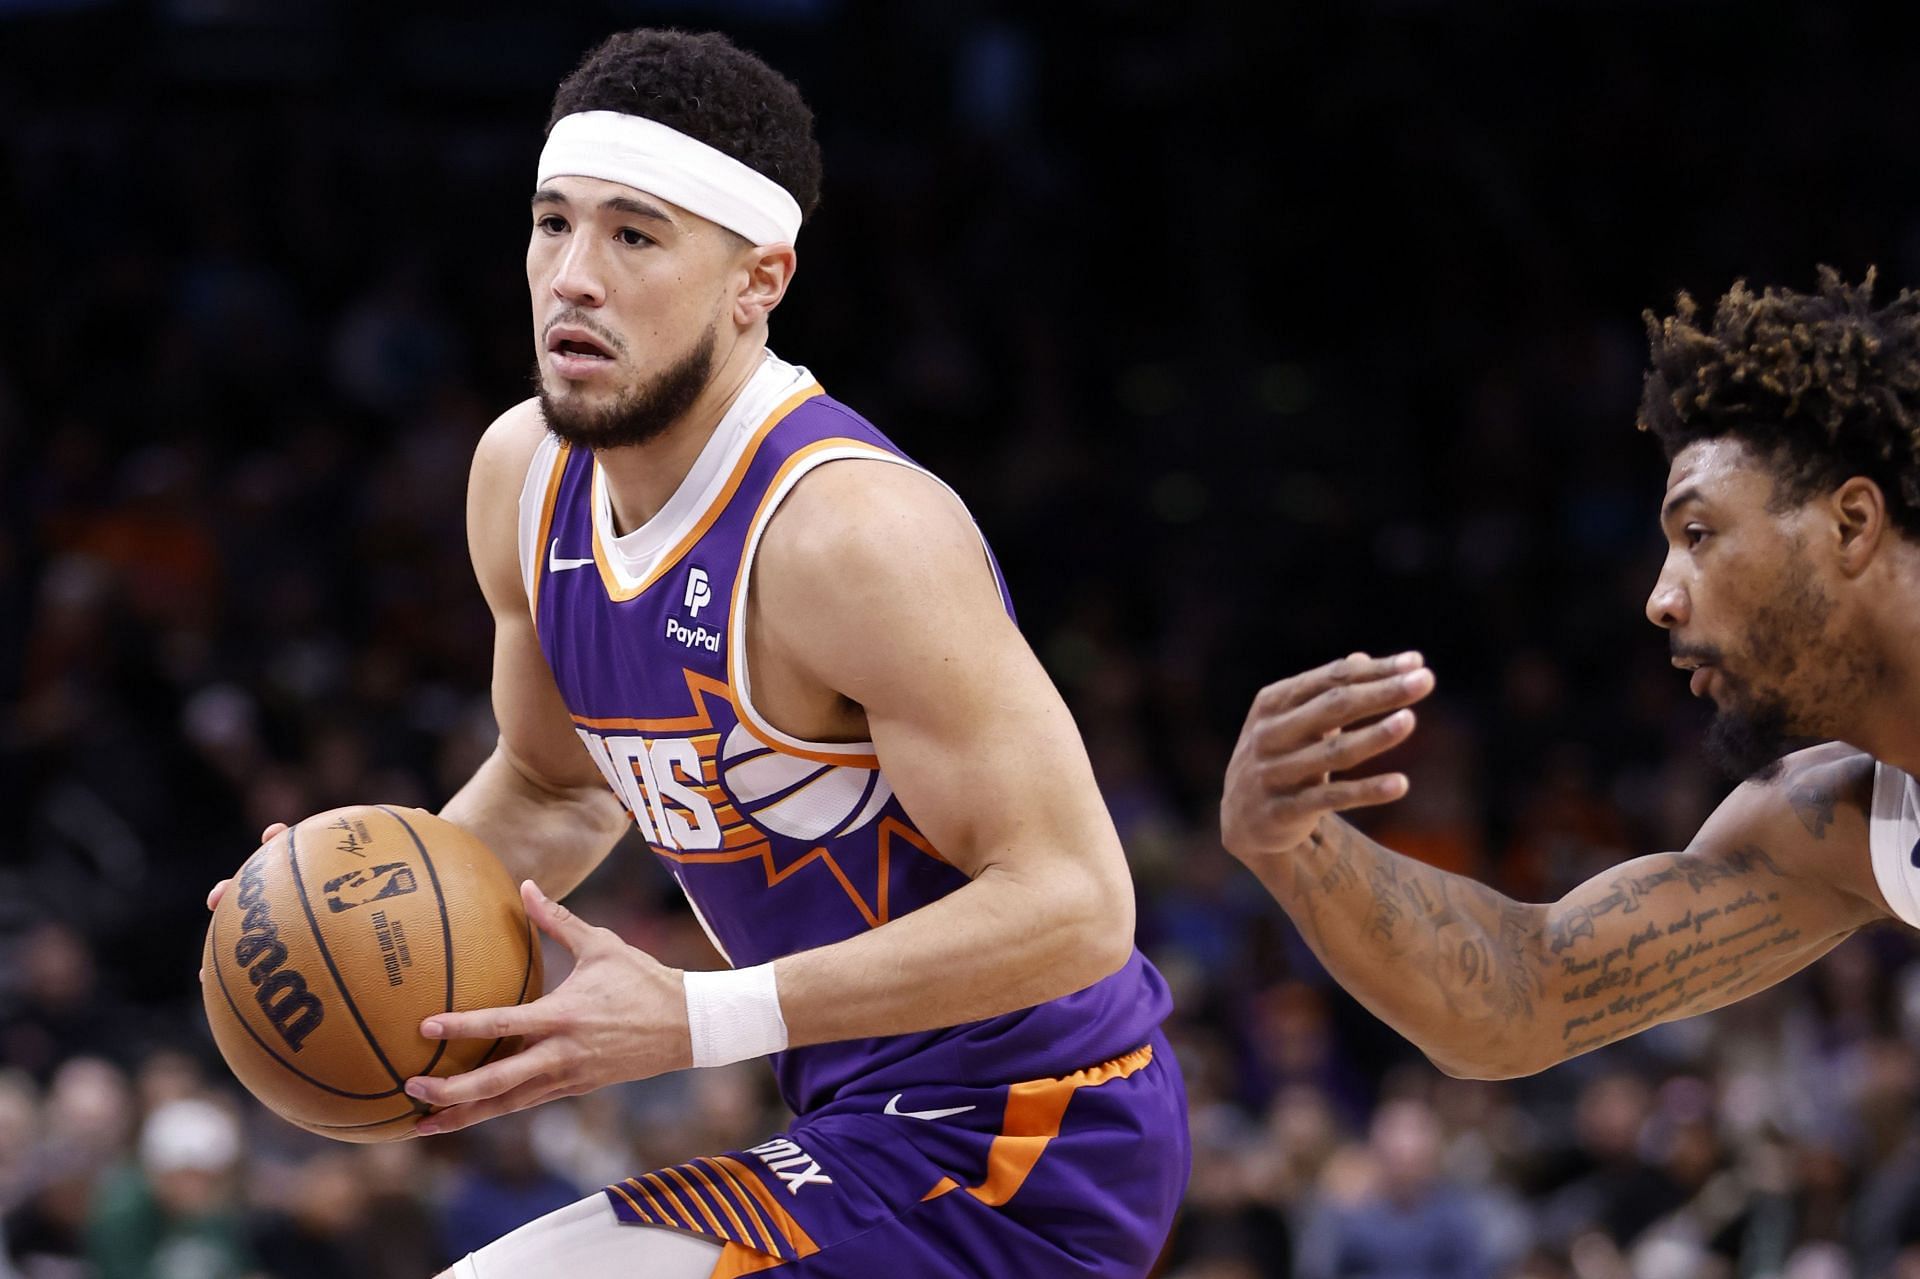 What happened to Devin Booker?